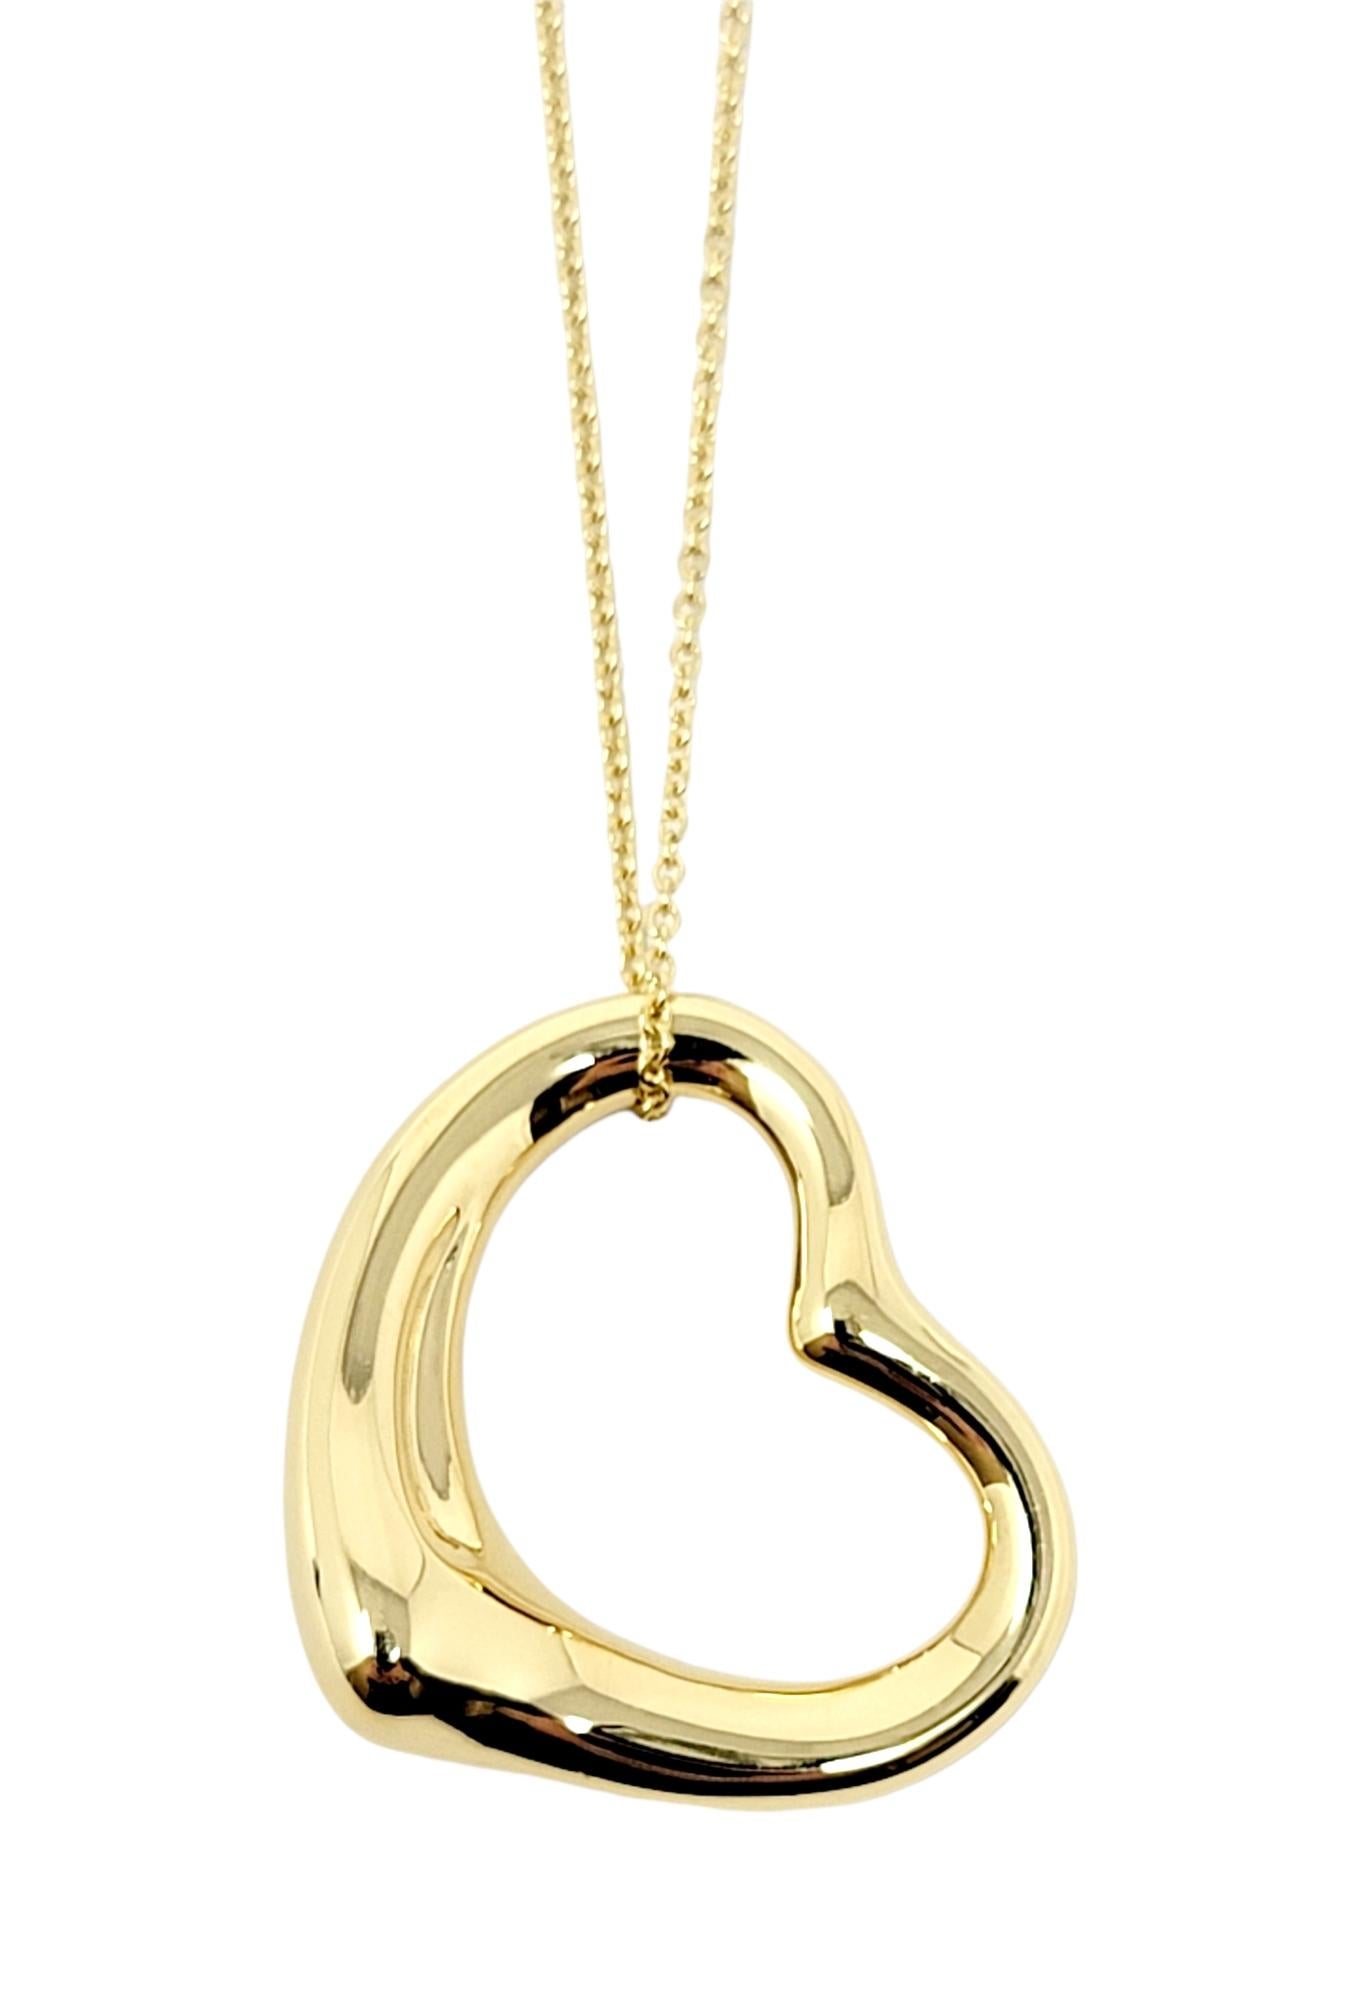 Gorgeous open heart pendant necklace by Elsa Peretti for Tiffany & Co. exudes minimalist elegance. The timeless design combined with the warm yellow gold setting makes for a piece that you will admire for years to come. 

This beautiful designer